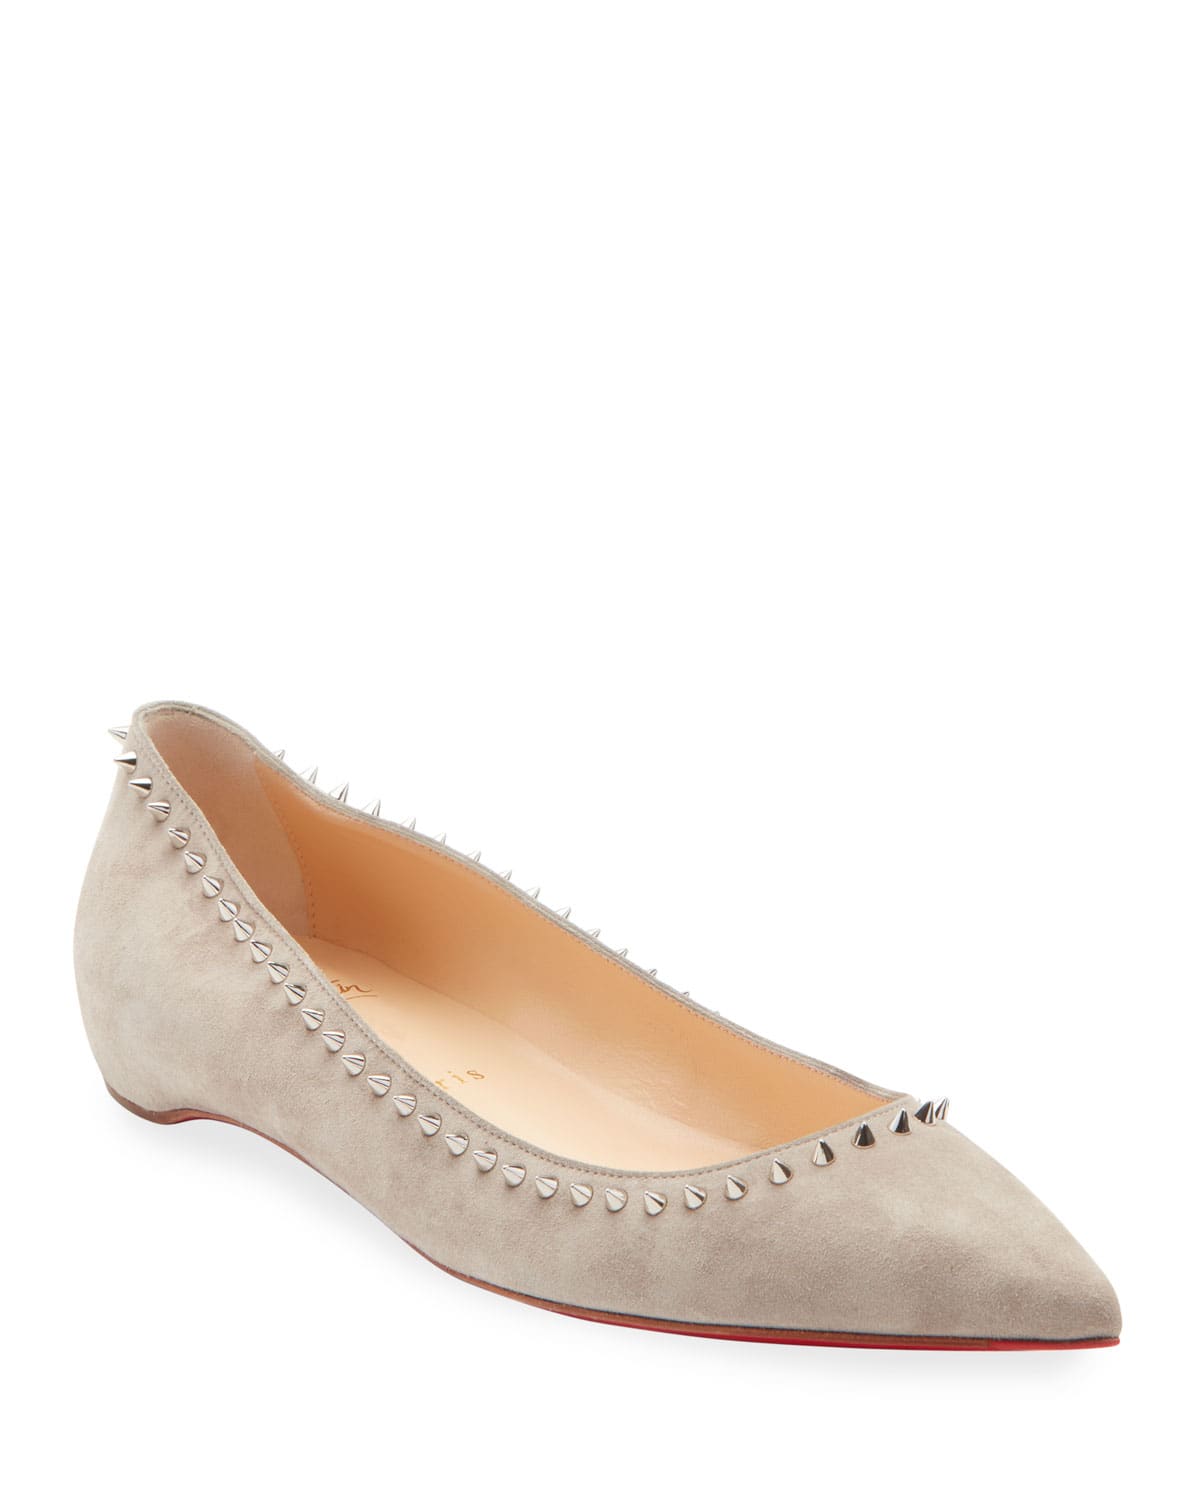 Christian Anjalina Spiked Suede Red Sole Ballerina Flats In Beige | ModeSens